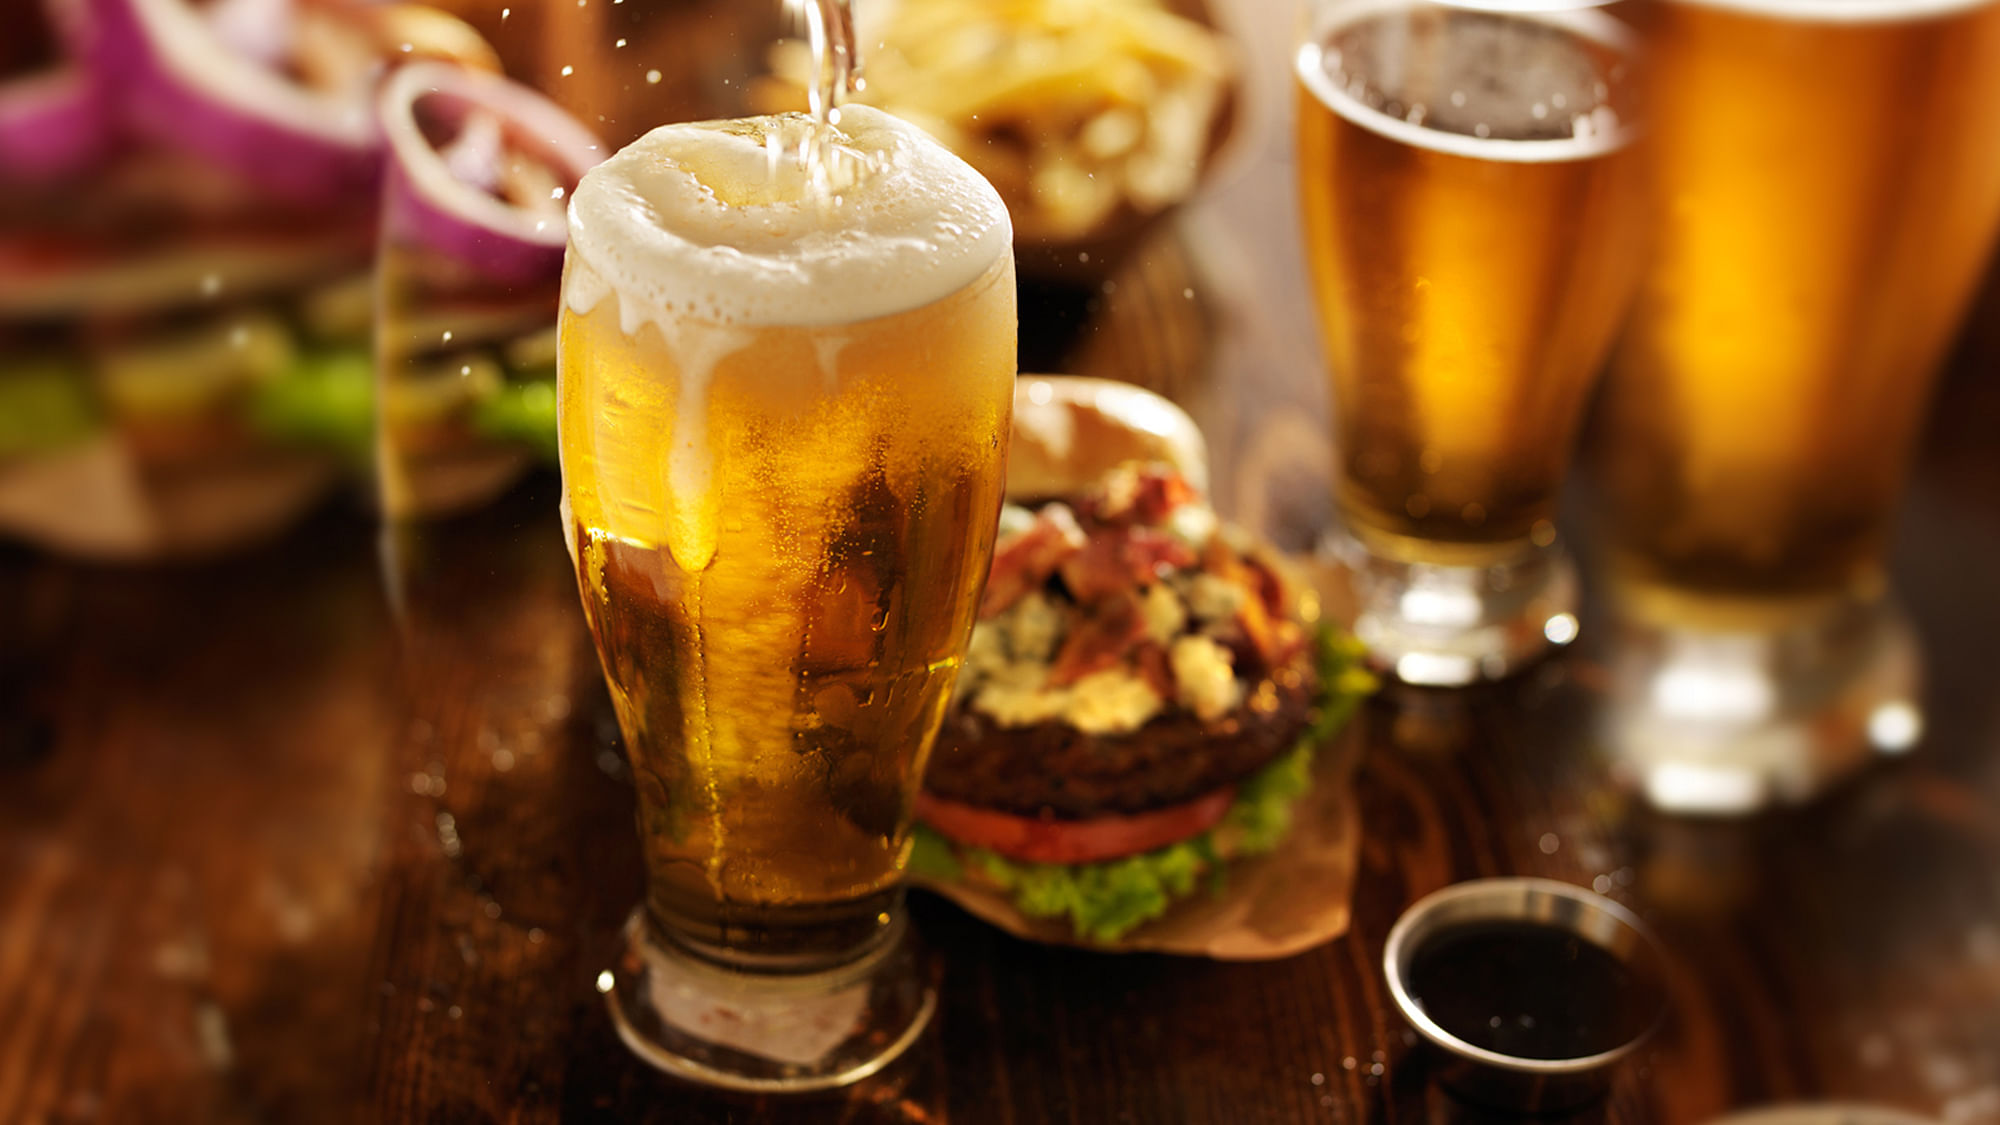 Find out about foods that can help you minimize the damage caused by drinking alcohol.